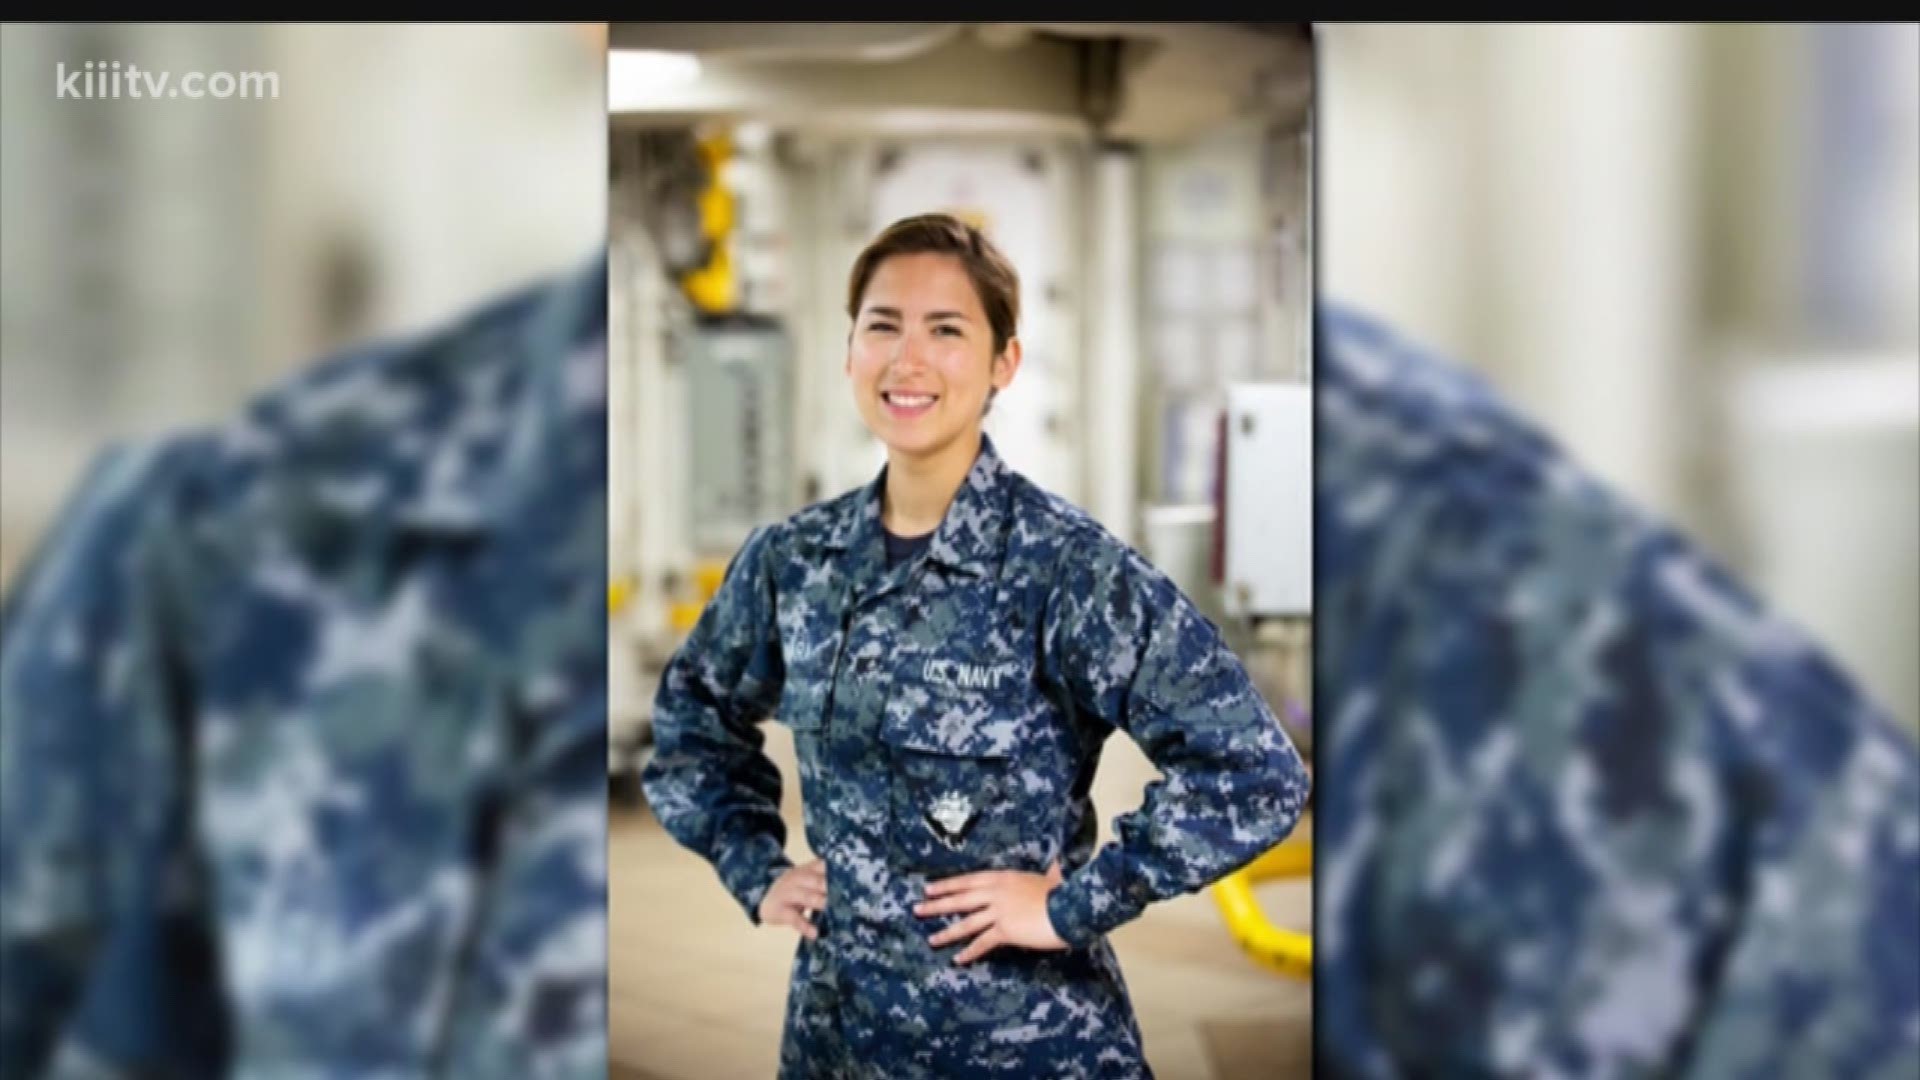 Seaman Eleanor Vara is a mass communication specialist aboard USS Carl Vinson, currently operating out of San Diego.